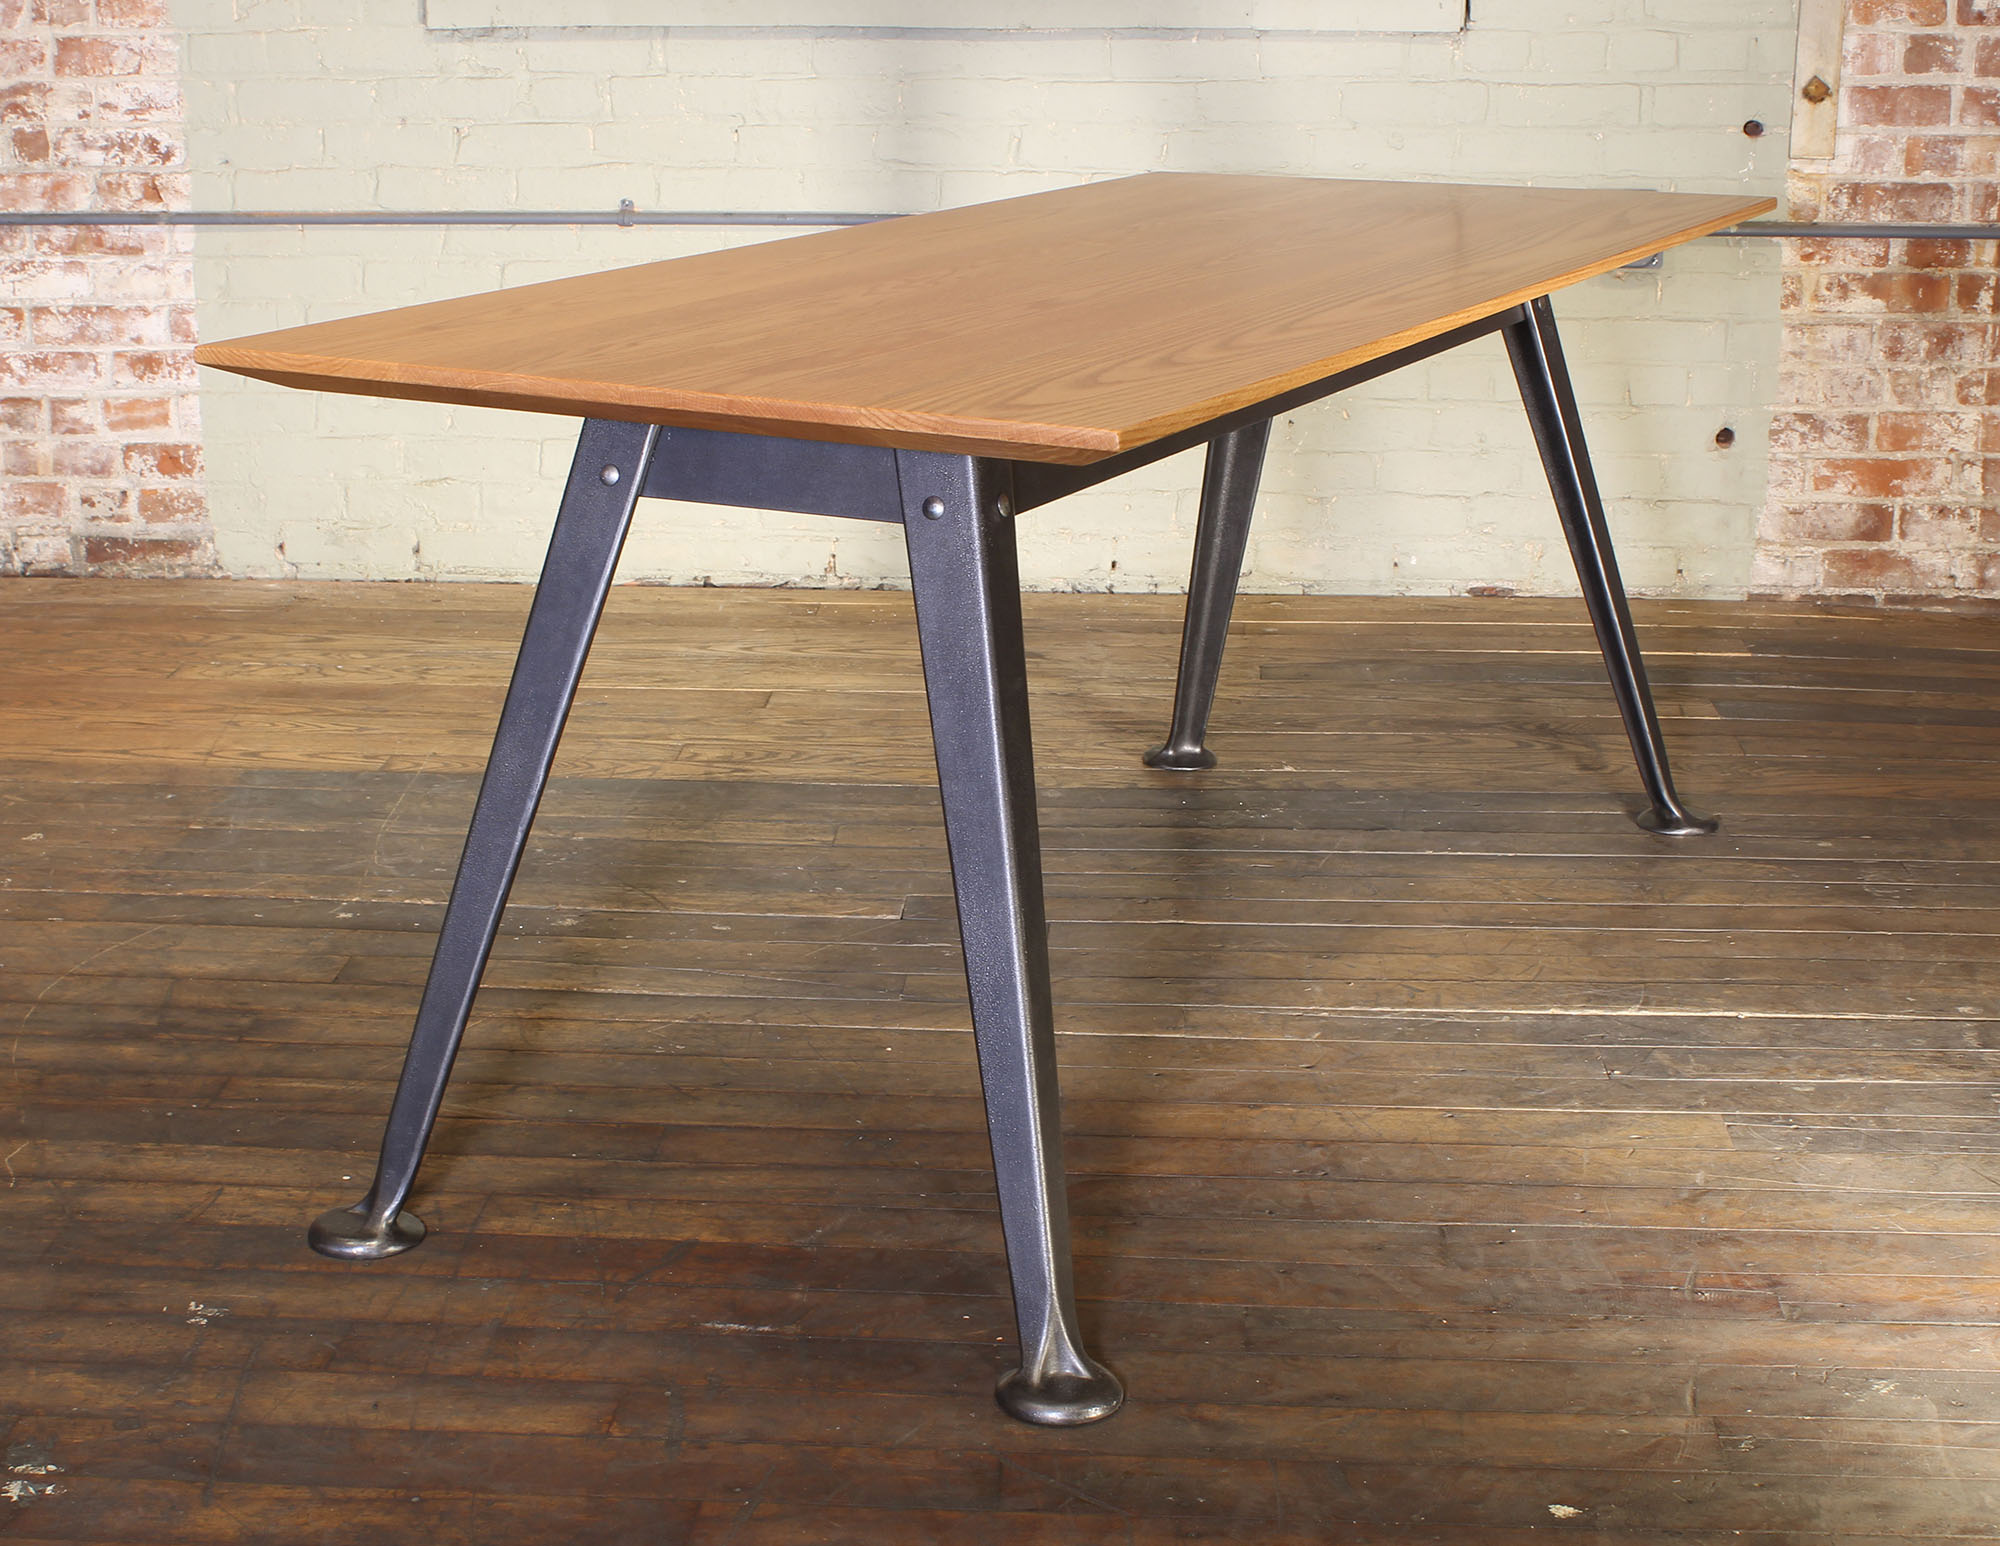 Splay-Leg Table by Get Back